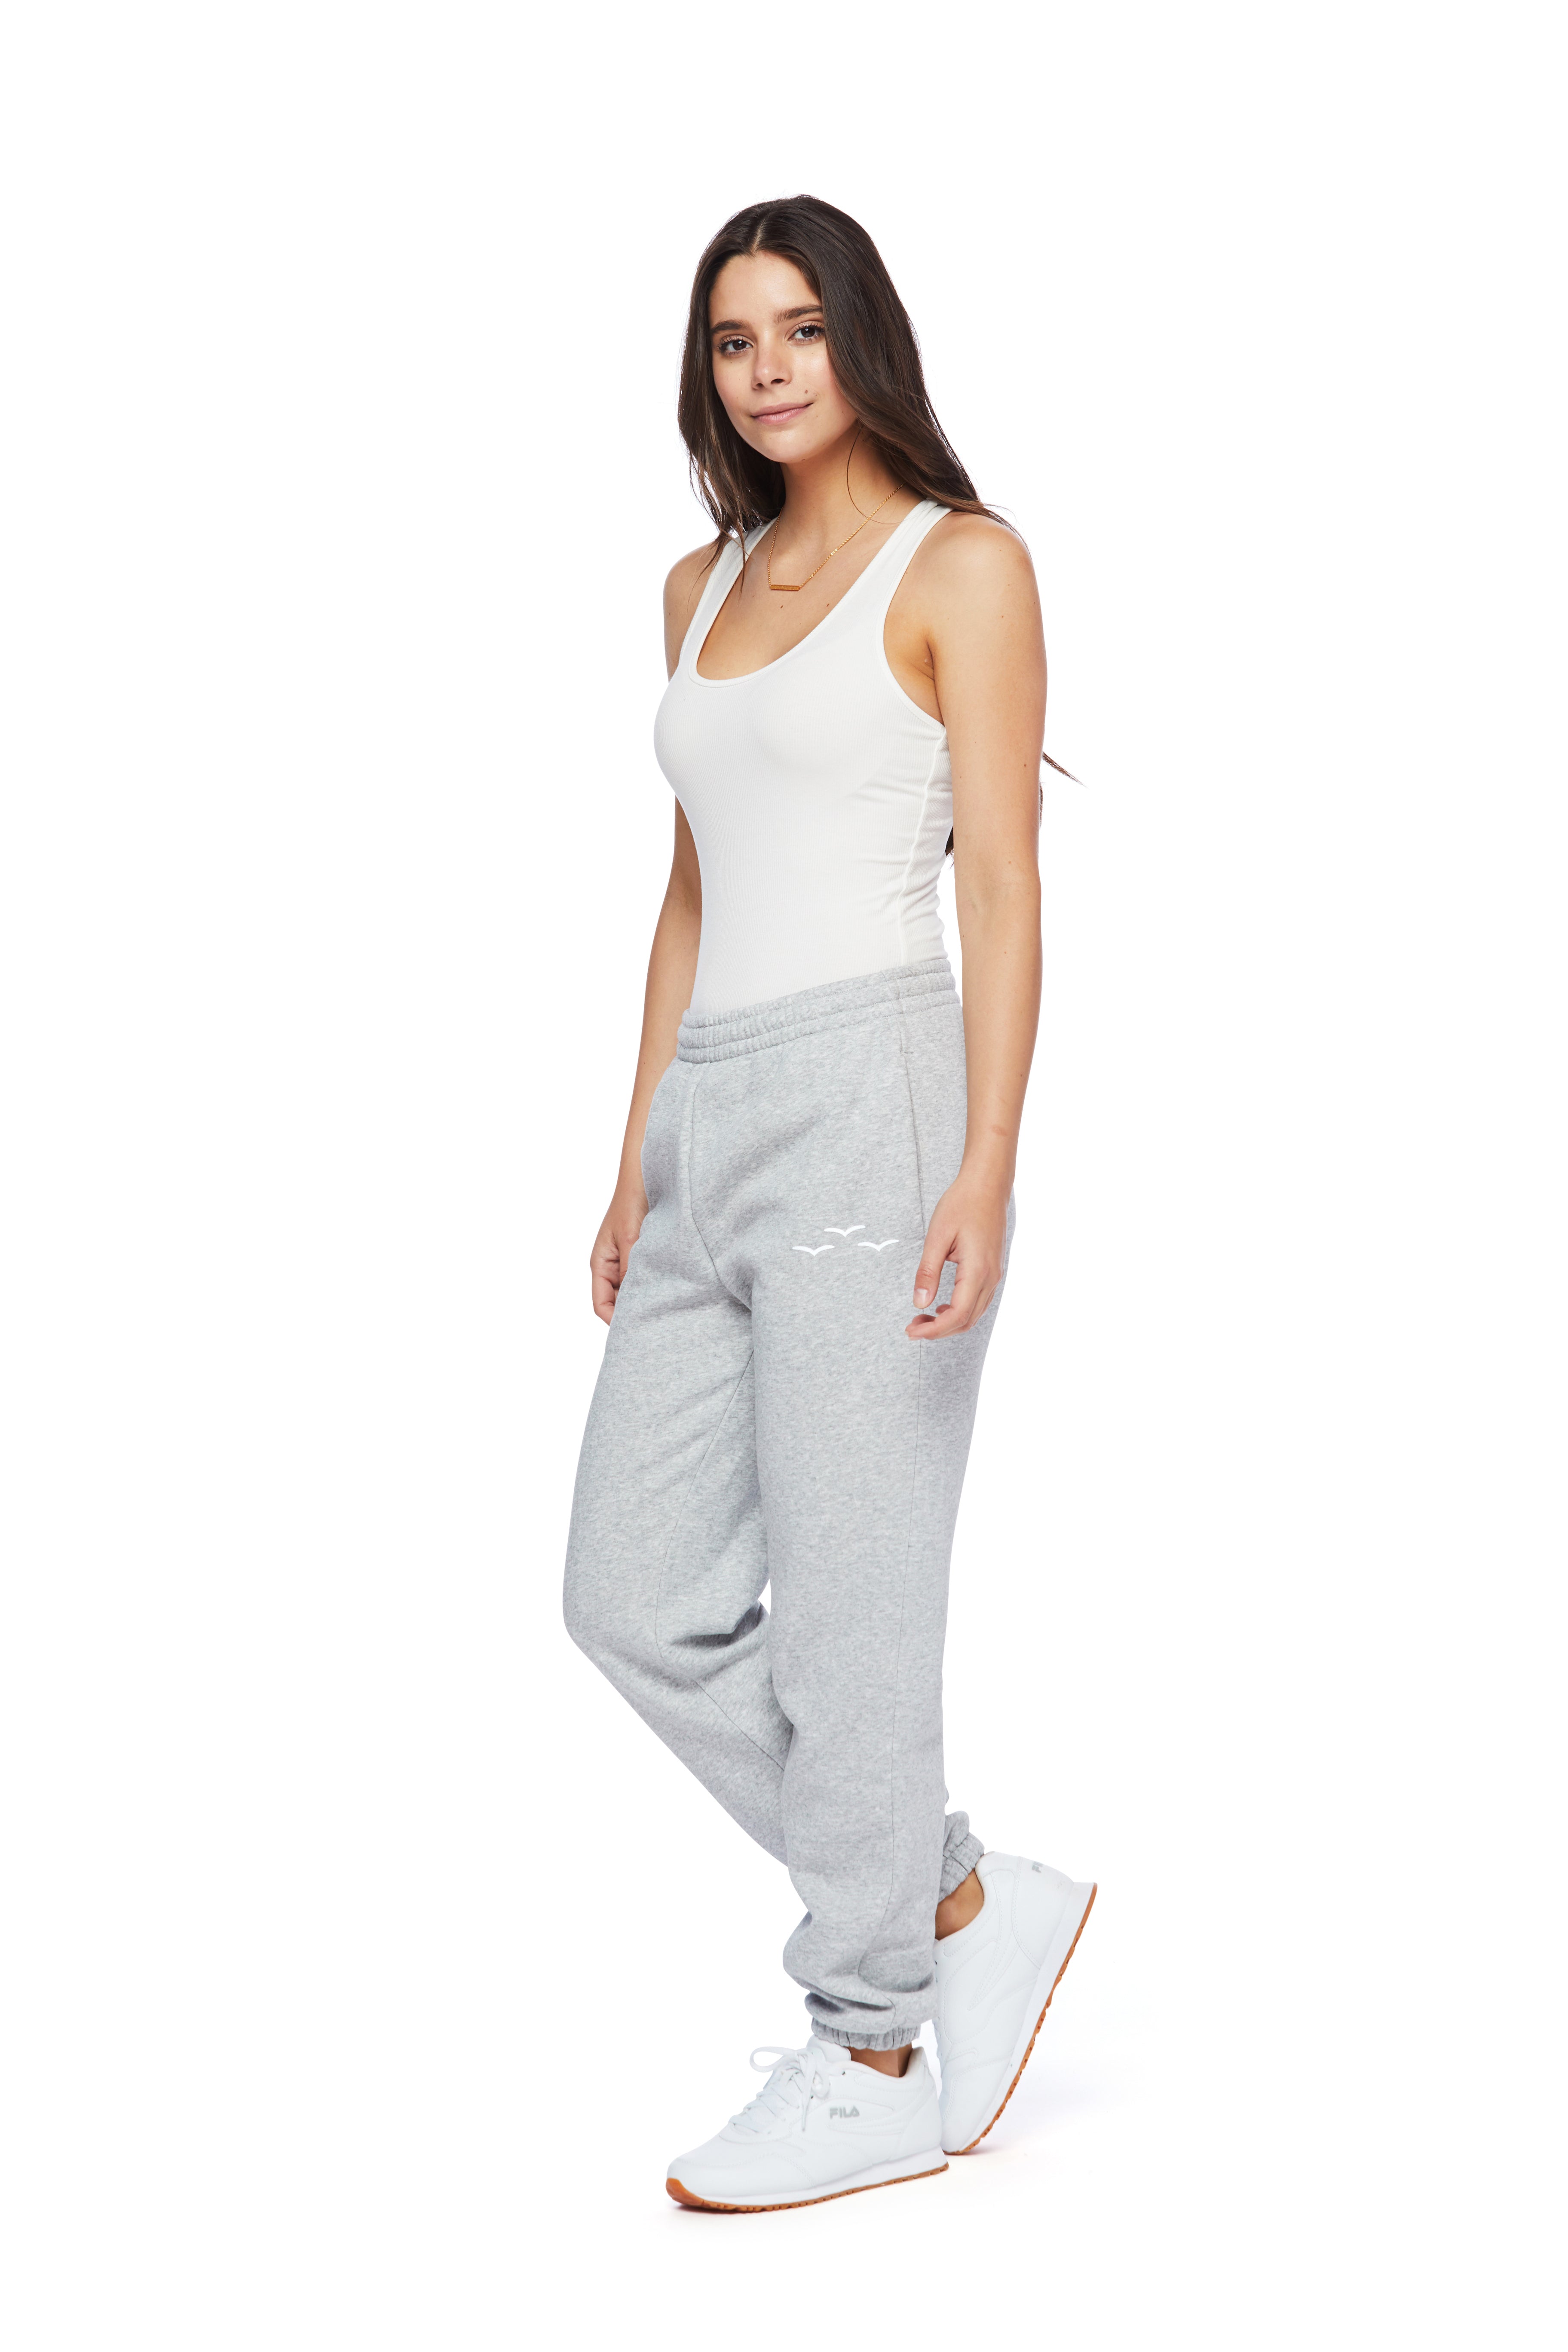 Nike Women's warm cotton sweatpants: for sale at 49.99€ on